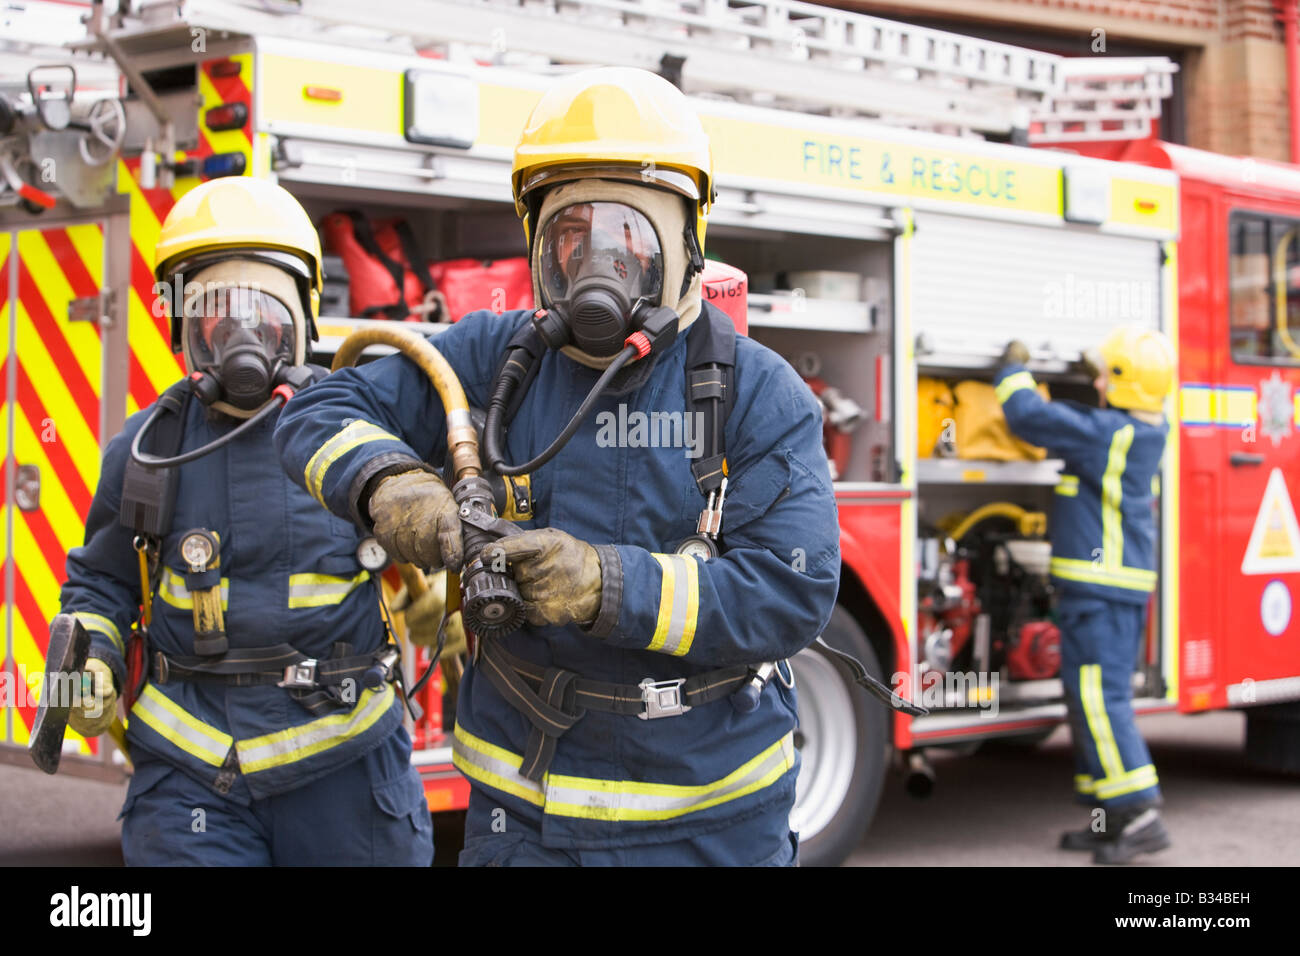 Two firefighters with hose and axe walking away from fire engine and another firefighter in background (selective focus) Stock Photo